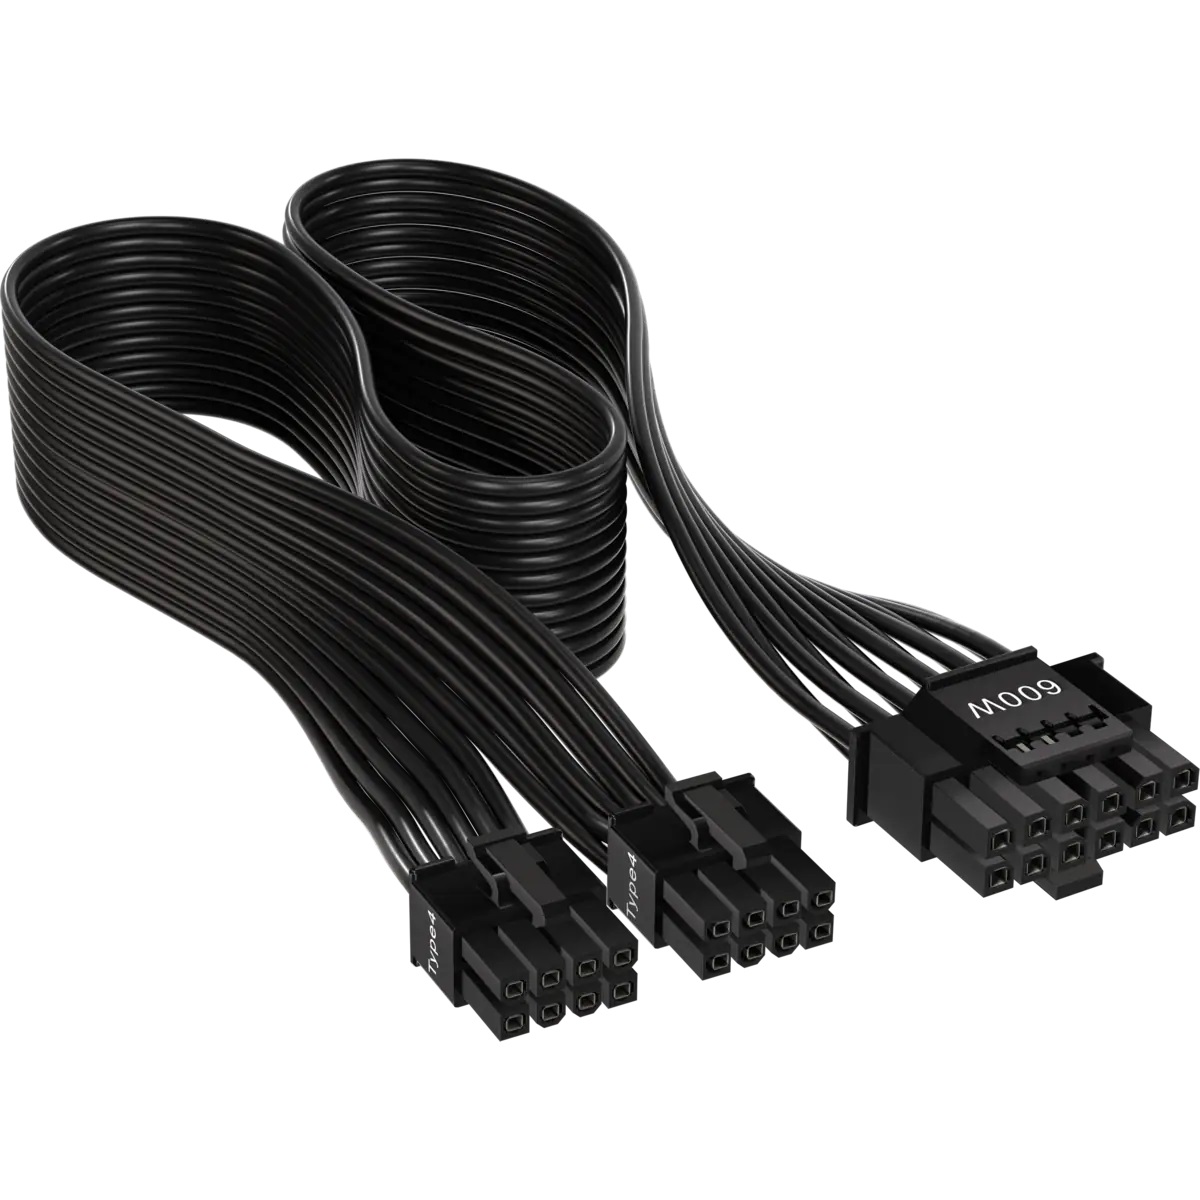 Power supplies for RTX 4090: Corsair offers 600 watt cables if necessary - up to 1200 watt power supply required